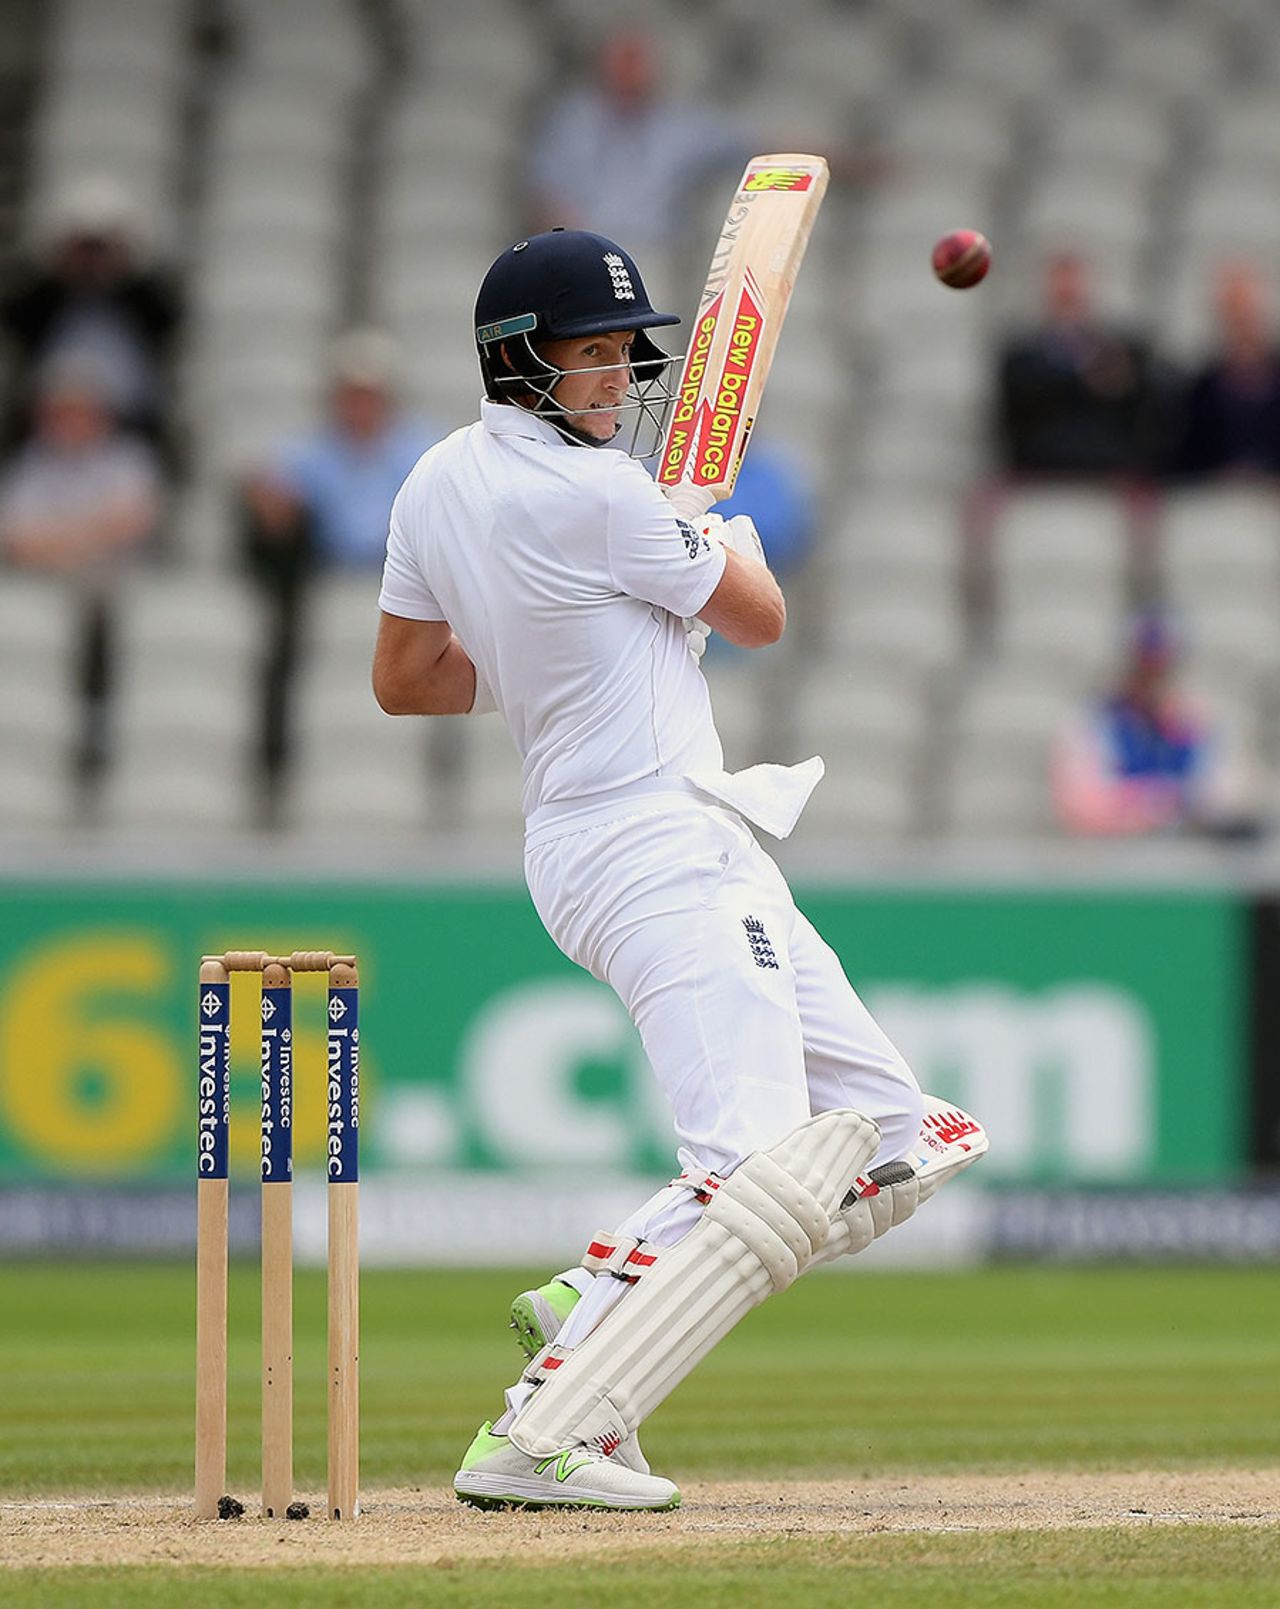 Joe Root cuts during his 38-ball fifty, England v Pakistan, 2nd Investec Test, Old Trafford, 4th day, July 25, 2016